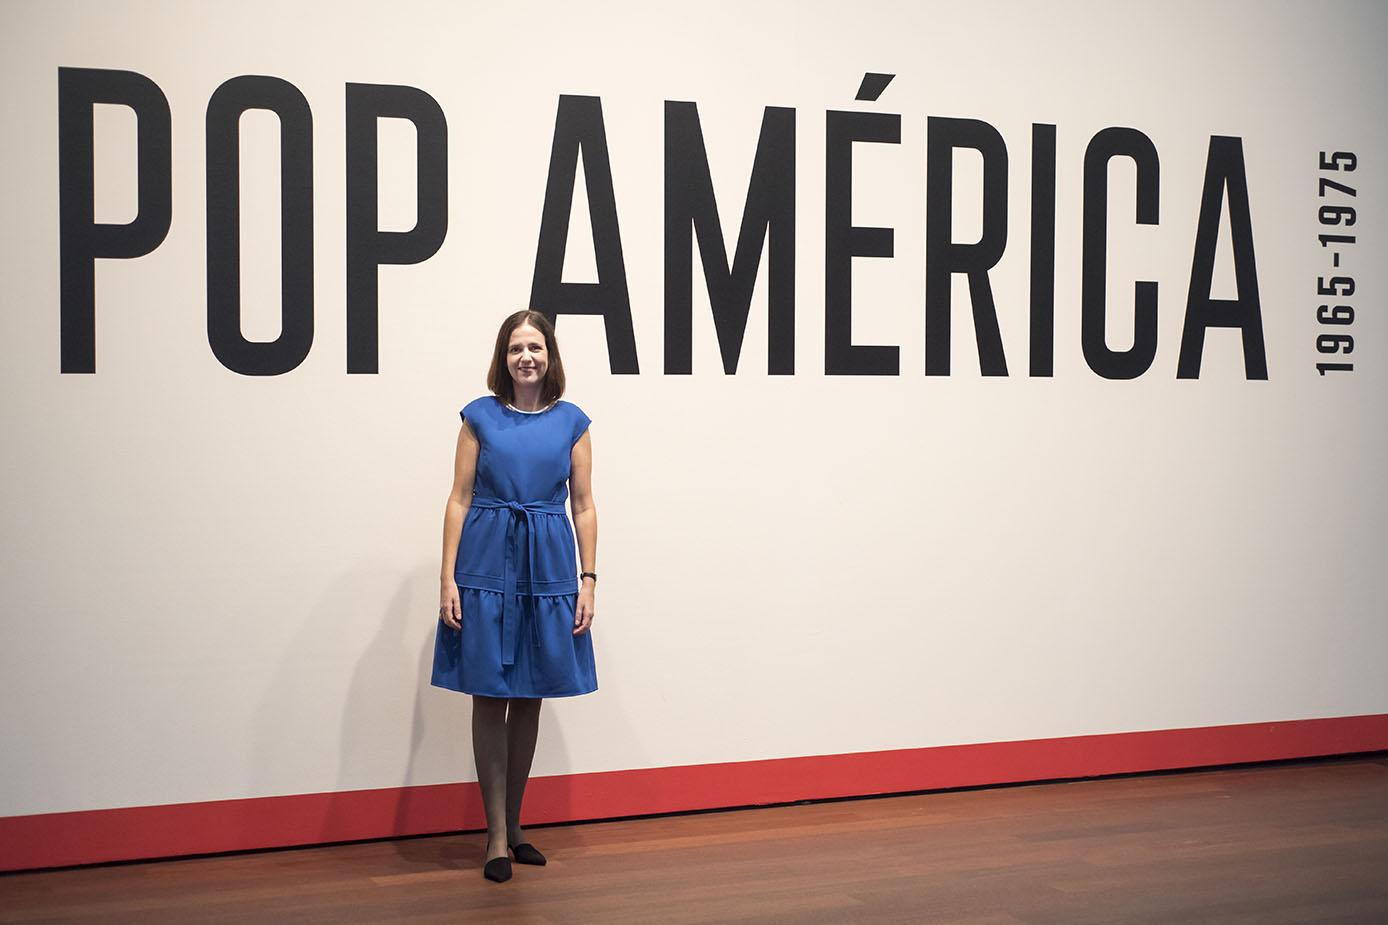 Esther Gabara curated the exhibition &amp;amp;amp;amp;amp;quot;Pop América&amp;amp;amp;amp;amp;quot;